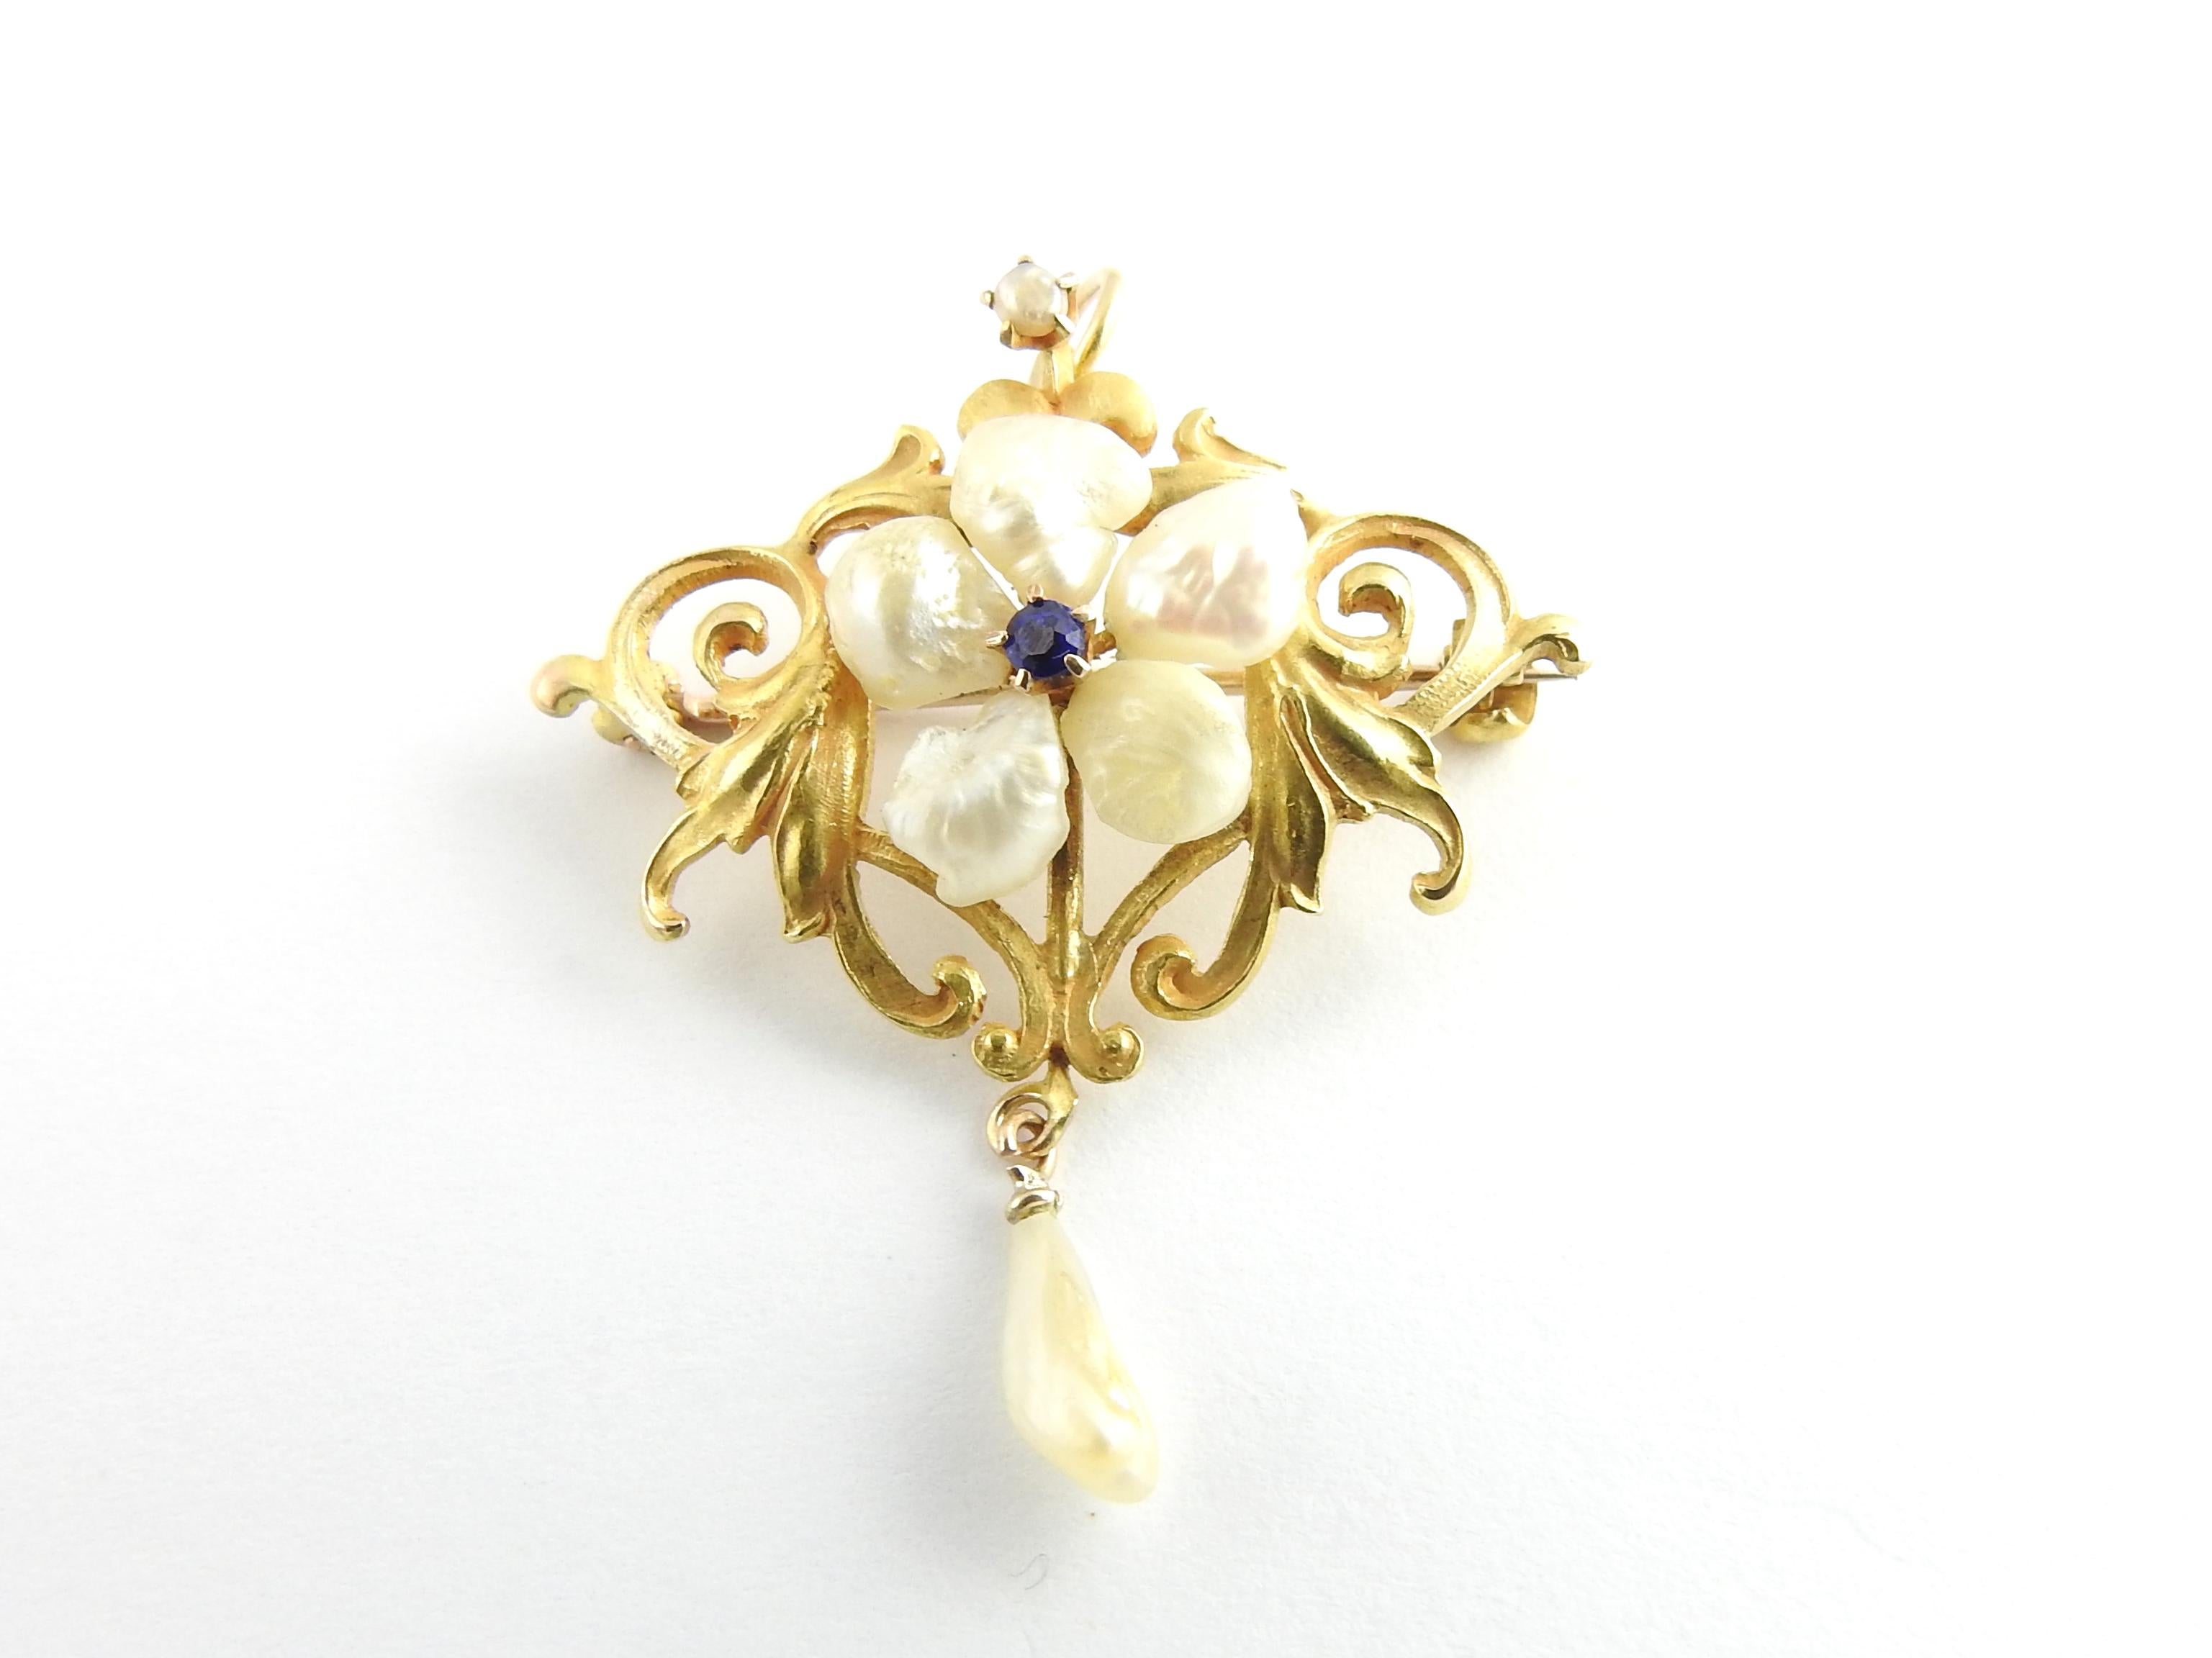 Vintage 10 Karat Yellow Gold Freshwater Pearl and Blue Stone Brooch/Pendant

This lovely piece features five freshwater pearls and one round blue stone crafted in beautifully detailed 10K yellow gold. Can be worn as a brooch or pendant.

Size: 25 mm